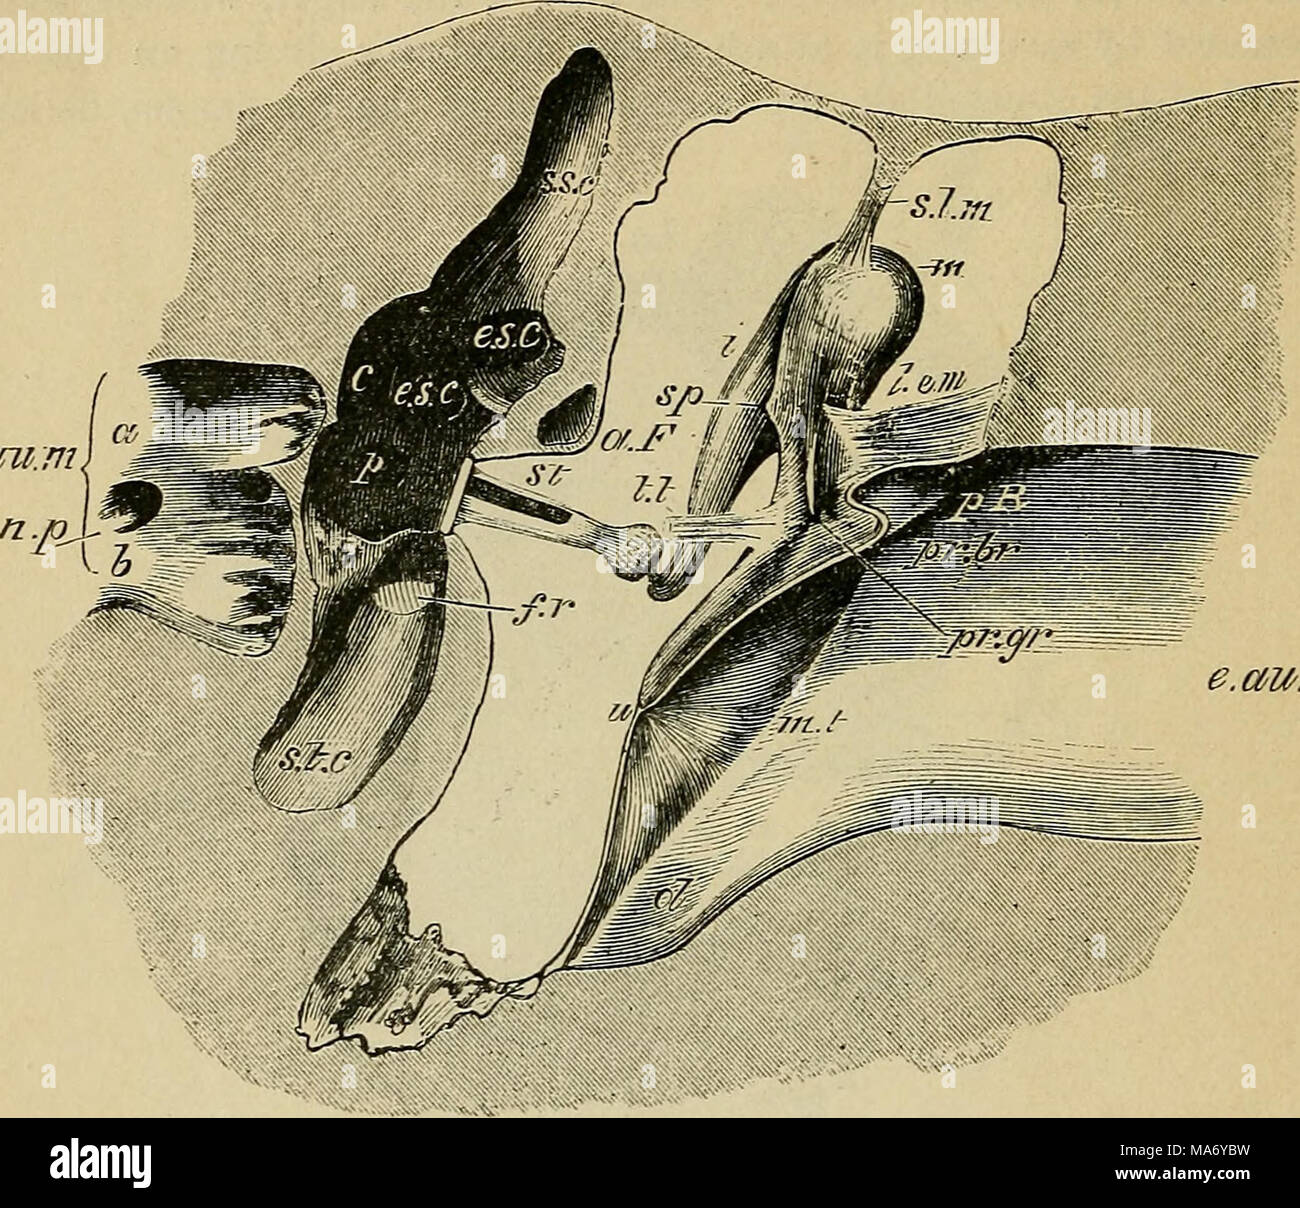 . Elementary physiology . au.m Fig. 117.—Profile view of the left membrana tympani and auditory ossicles from before and somewhat from above. Magnified four times- (E. A. S.) The anterior half of the membrane has been cut away by an oblique slice, m, head of the malleus ; sp, spur-like projection of the lower border of its articular surface ; pr. br, its short process ; pr. gr, root of processus gracilis, cut; s.l.fu, suspensory ligament of the malleus ; l.e.tn, its external ligament ; t.t, tendon of the tensor tympani, cut; i, incus, its long process; st, stapes in fenestra ovalis ; e.au.m, e Stock Photo